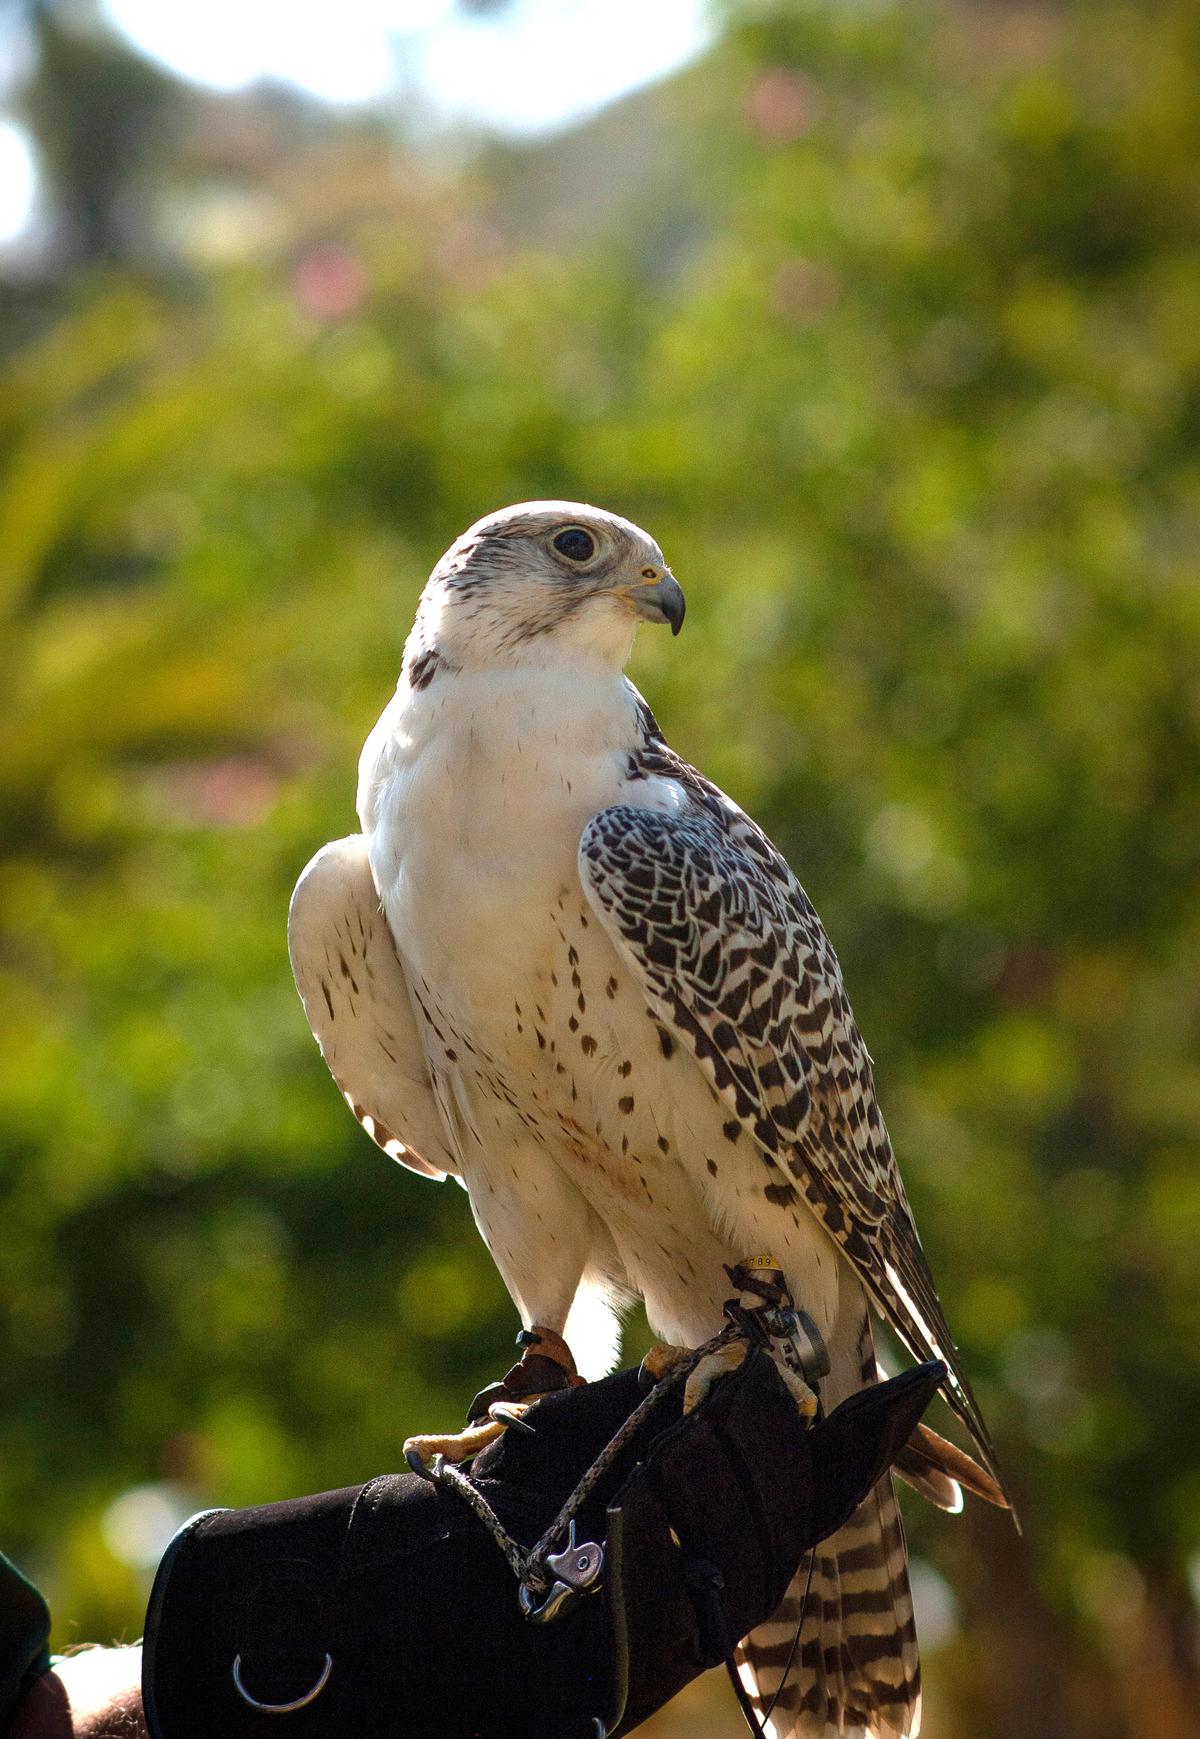 The Gyrfalcon is the largest falcon species in the world. (Jennifer Schneider for American Essence)